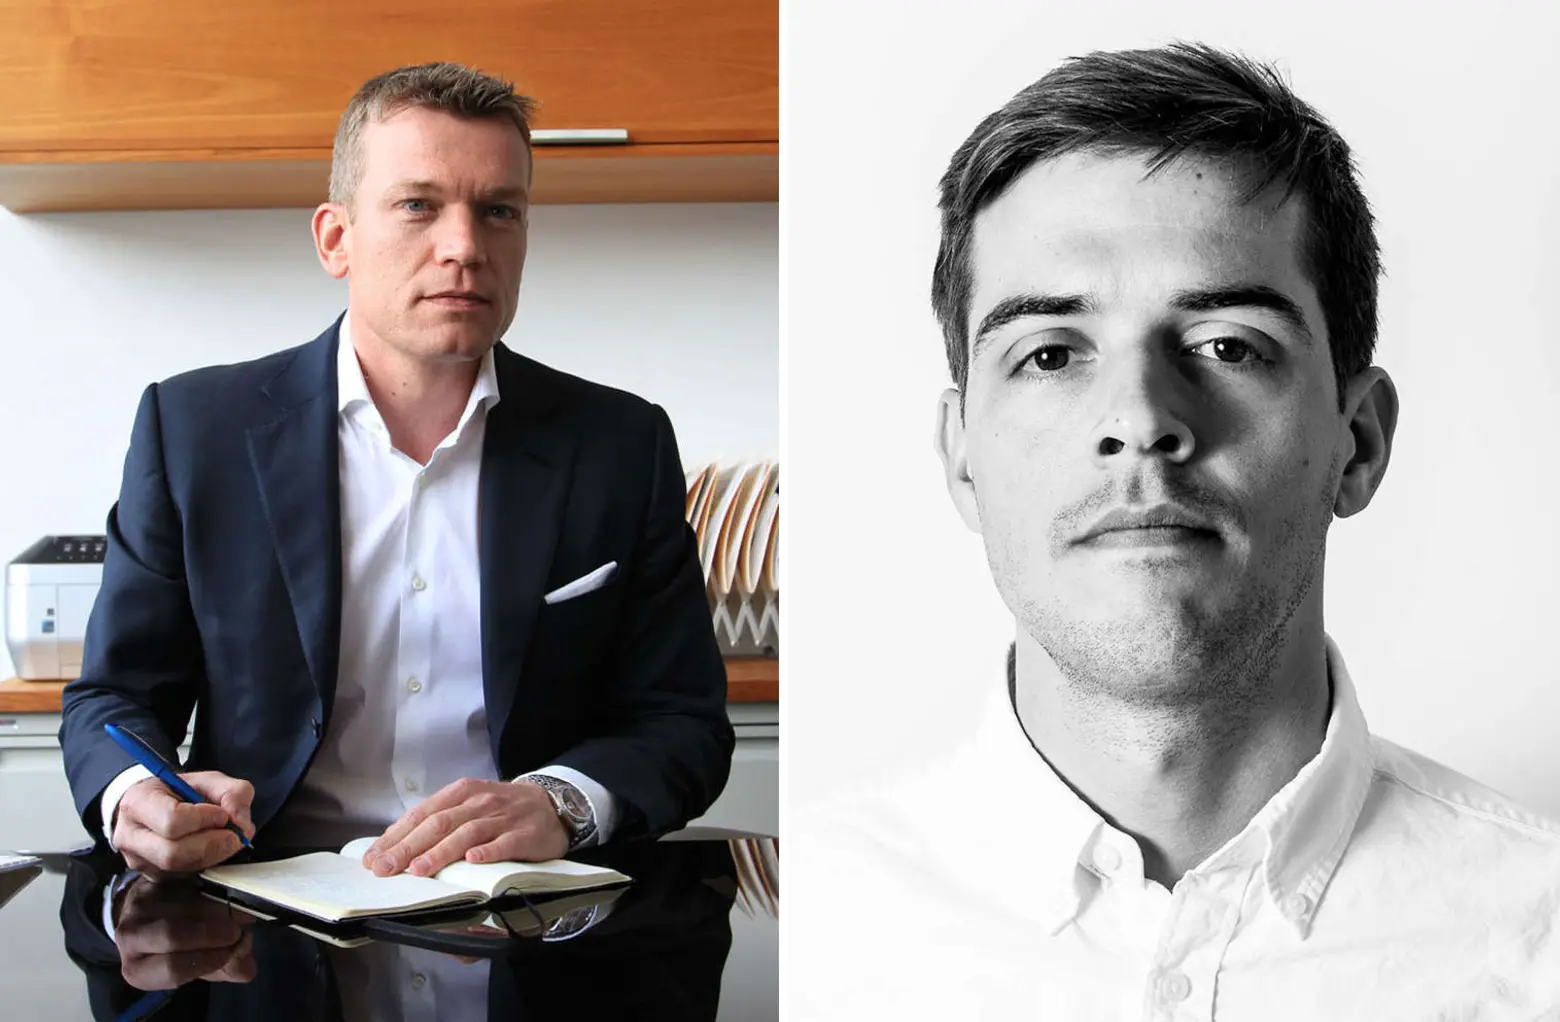 Fusing Art and Luxury Real Estate, Two Pros Discuss Their Approach